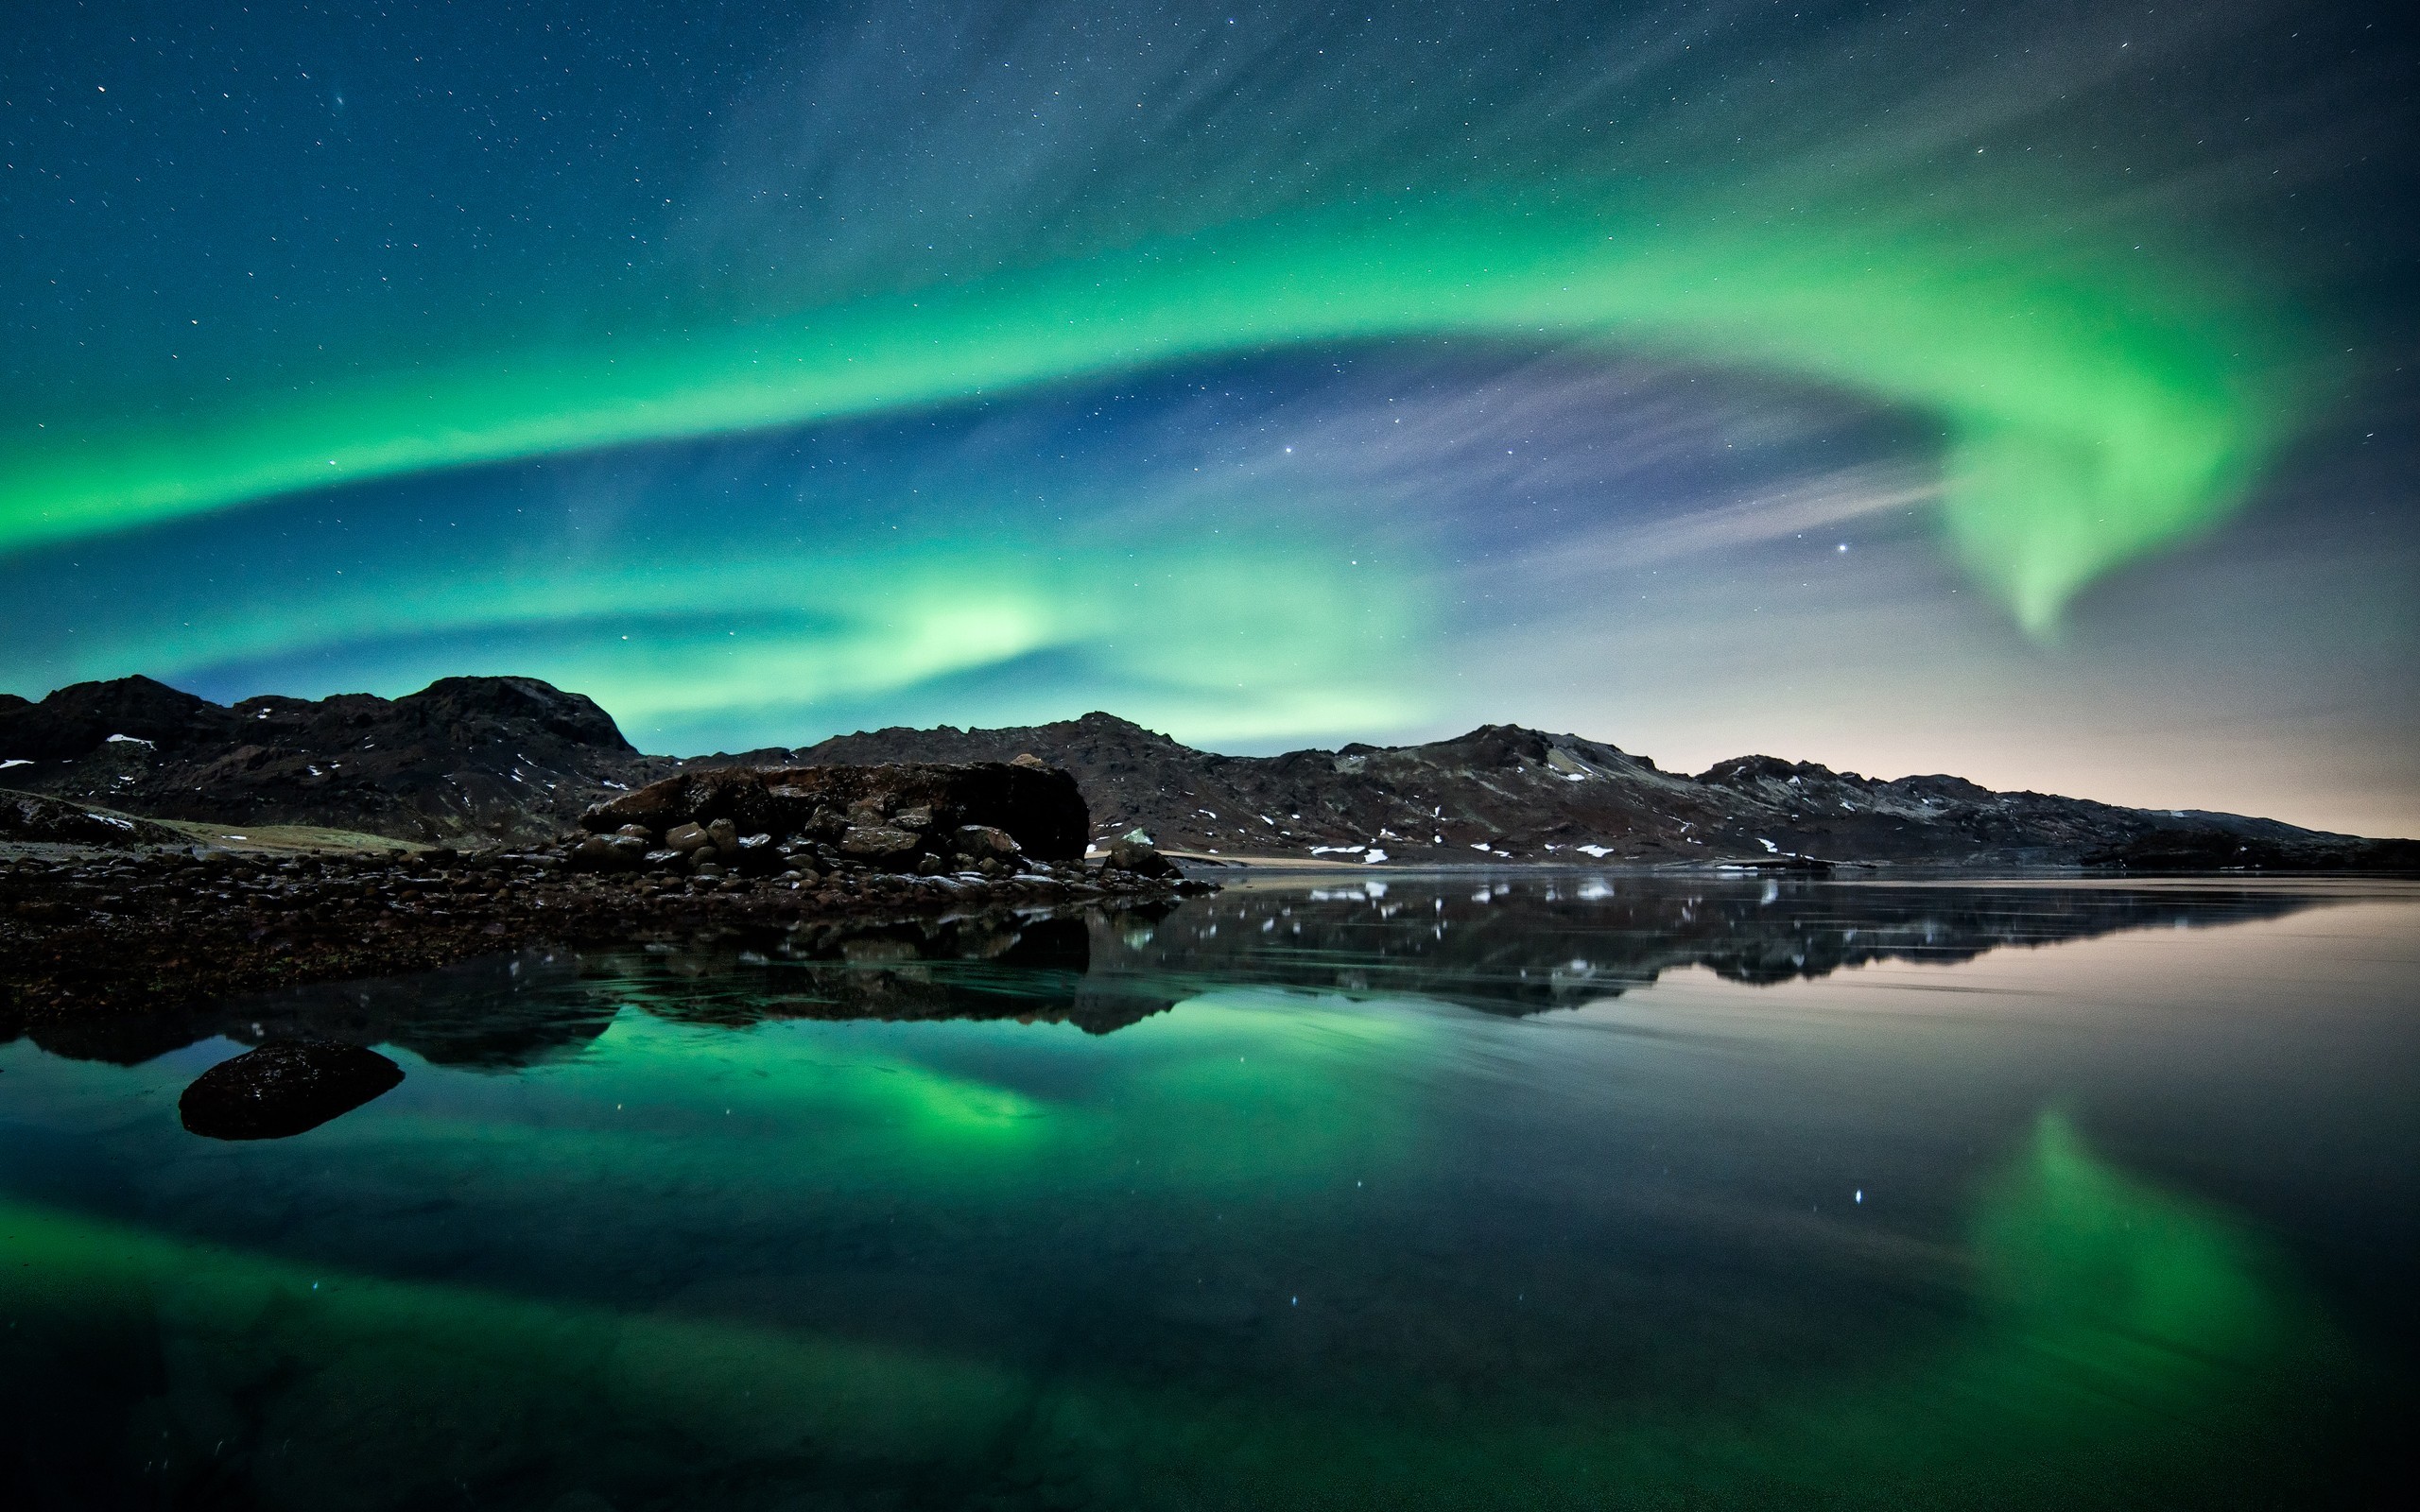 General 2560x1600 nature landscape aurorae night reflection water Iceland sky stars low light